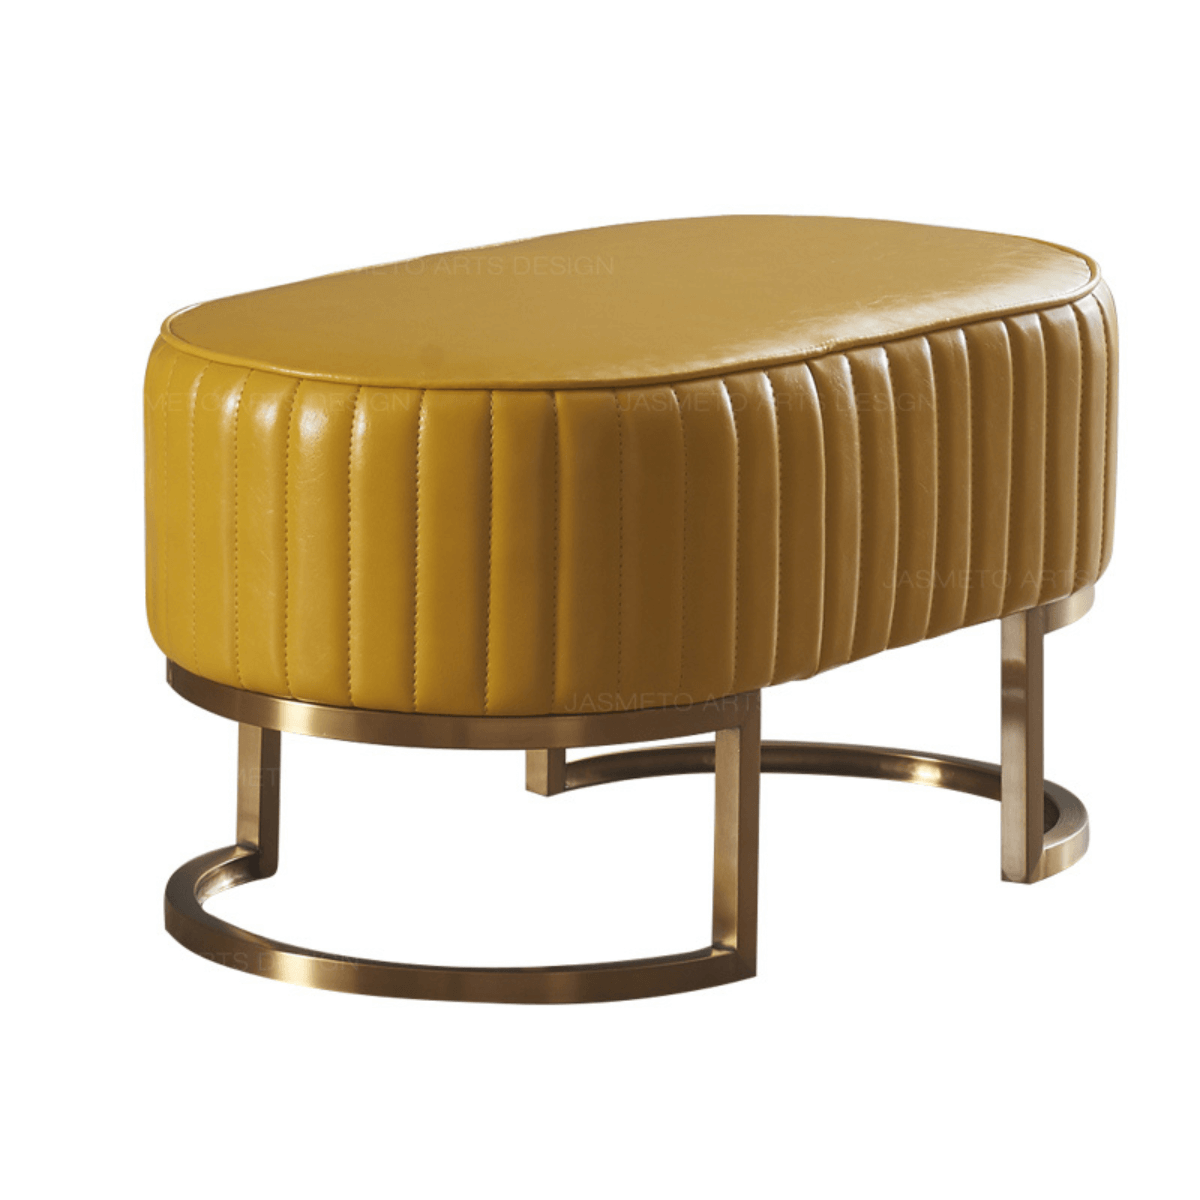 Shell Leather Oval Bench with Golden Half-moon Base 2